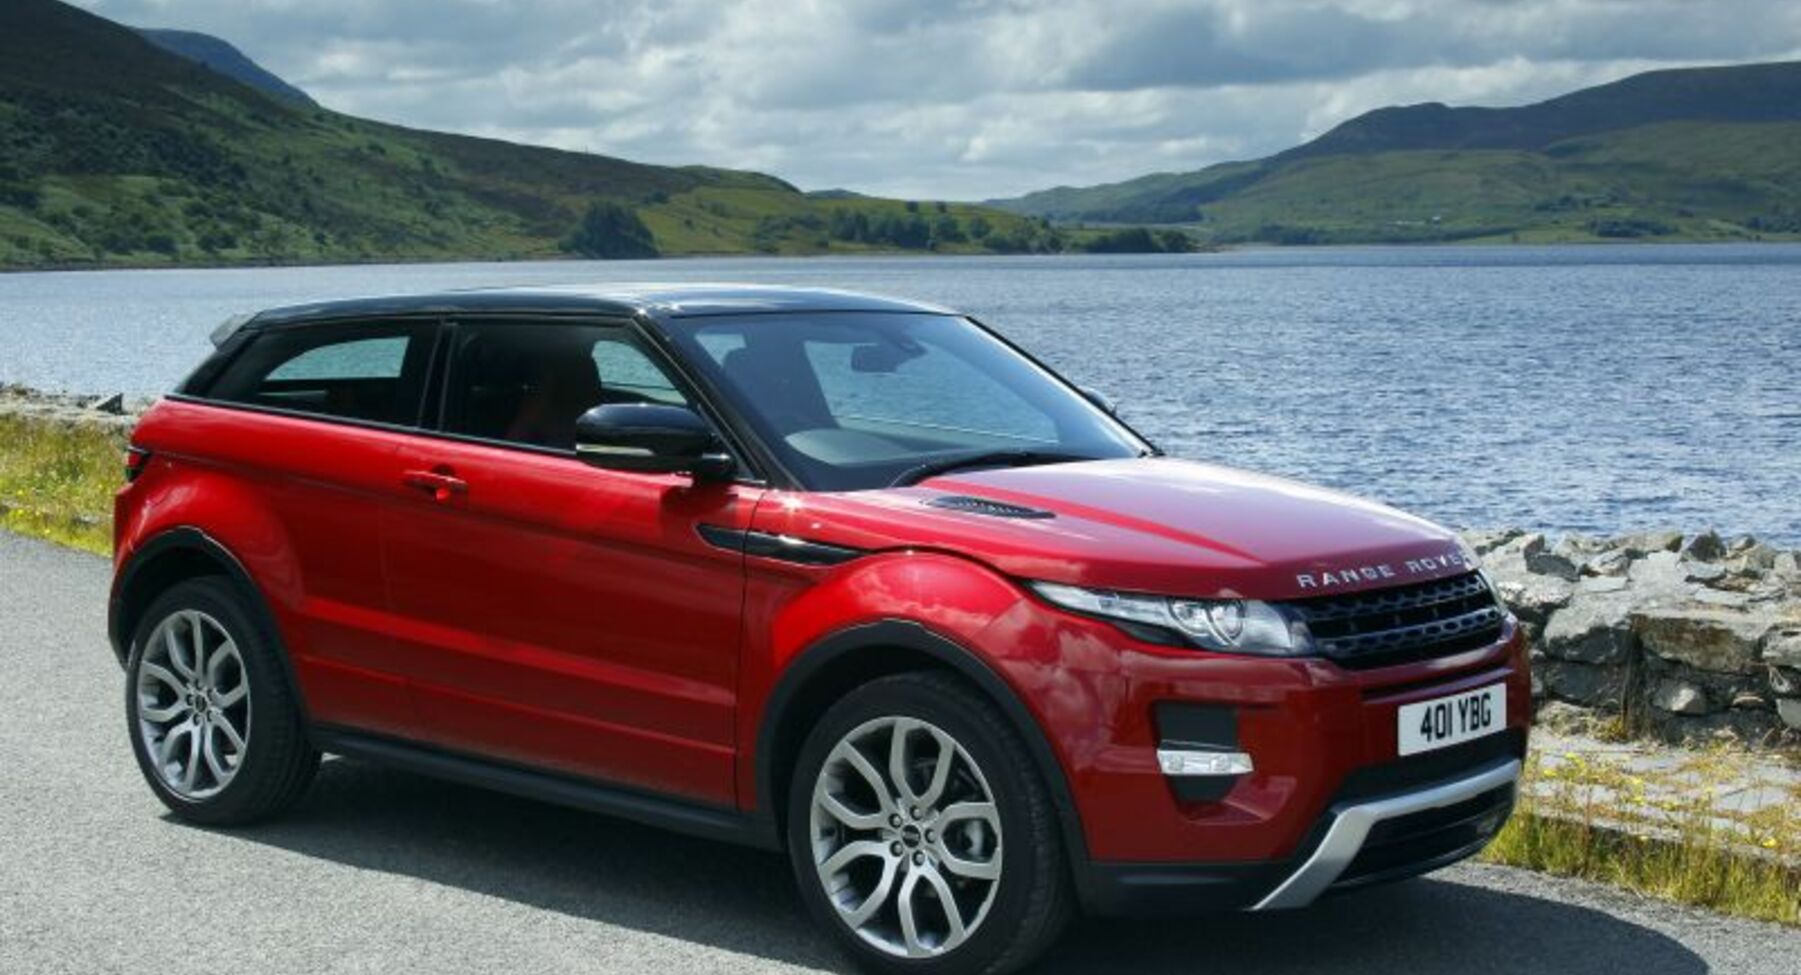 Land Rover Range Rover Evoque I coupe 2.2 SD4 (190 Hp) 4WD Automatic 2012, 2013, 2014 